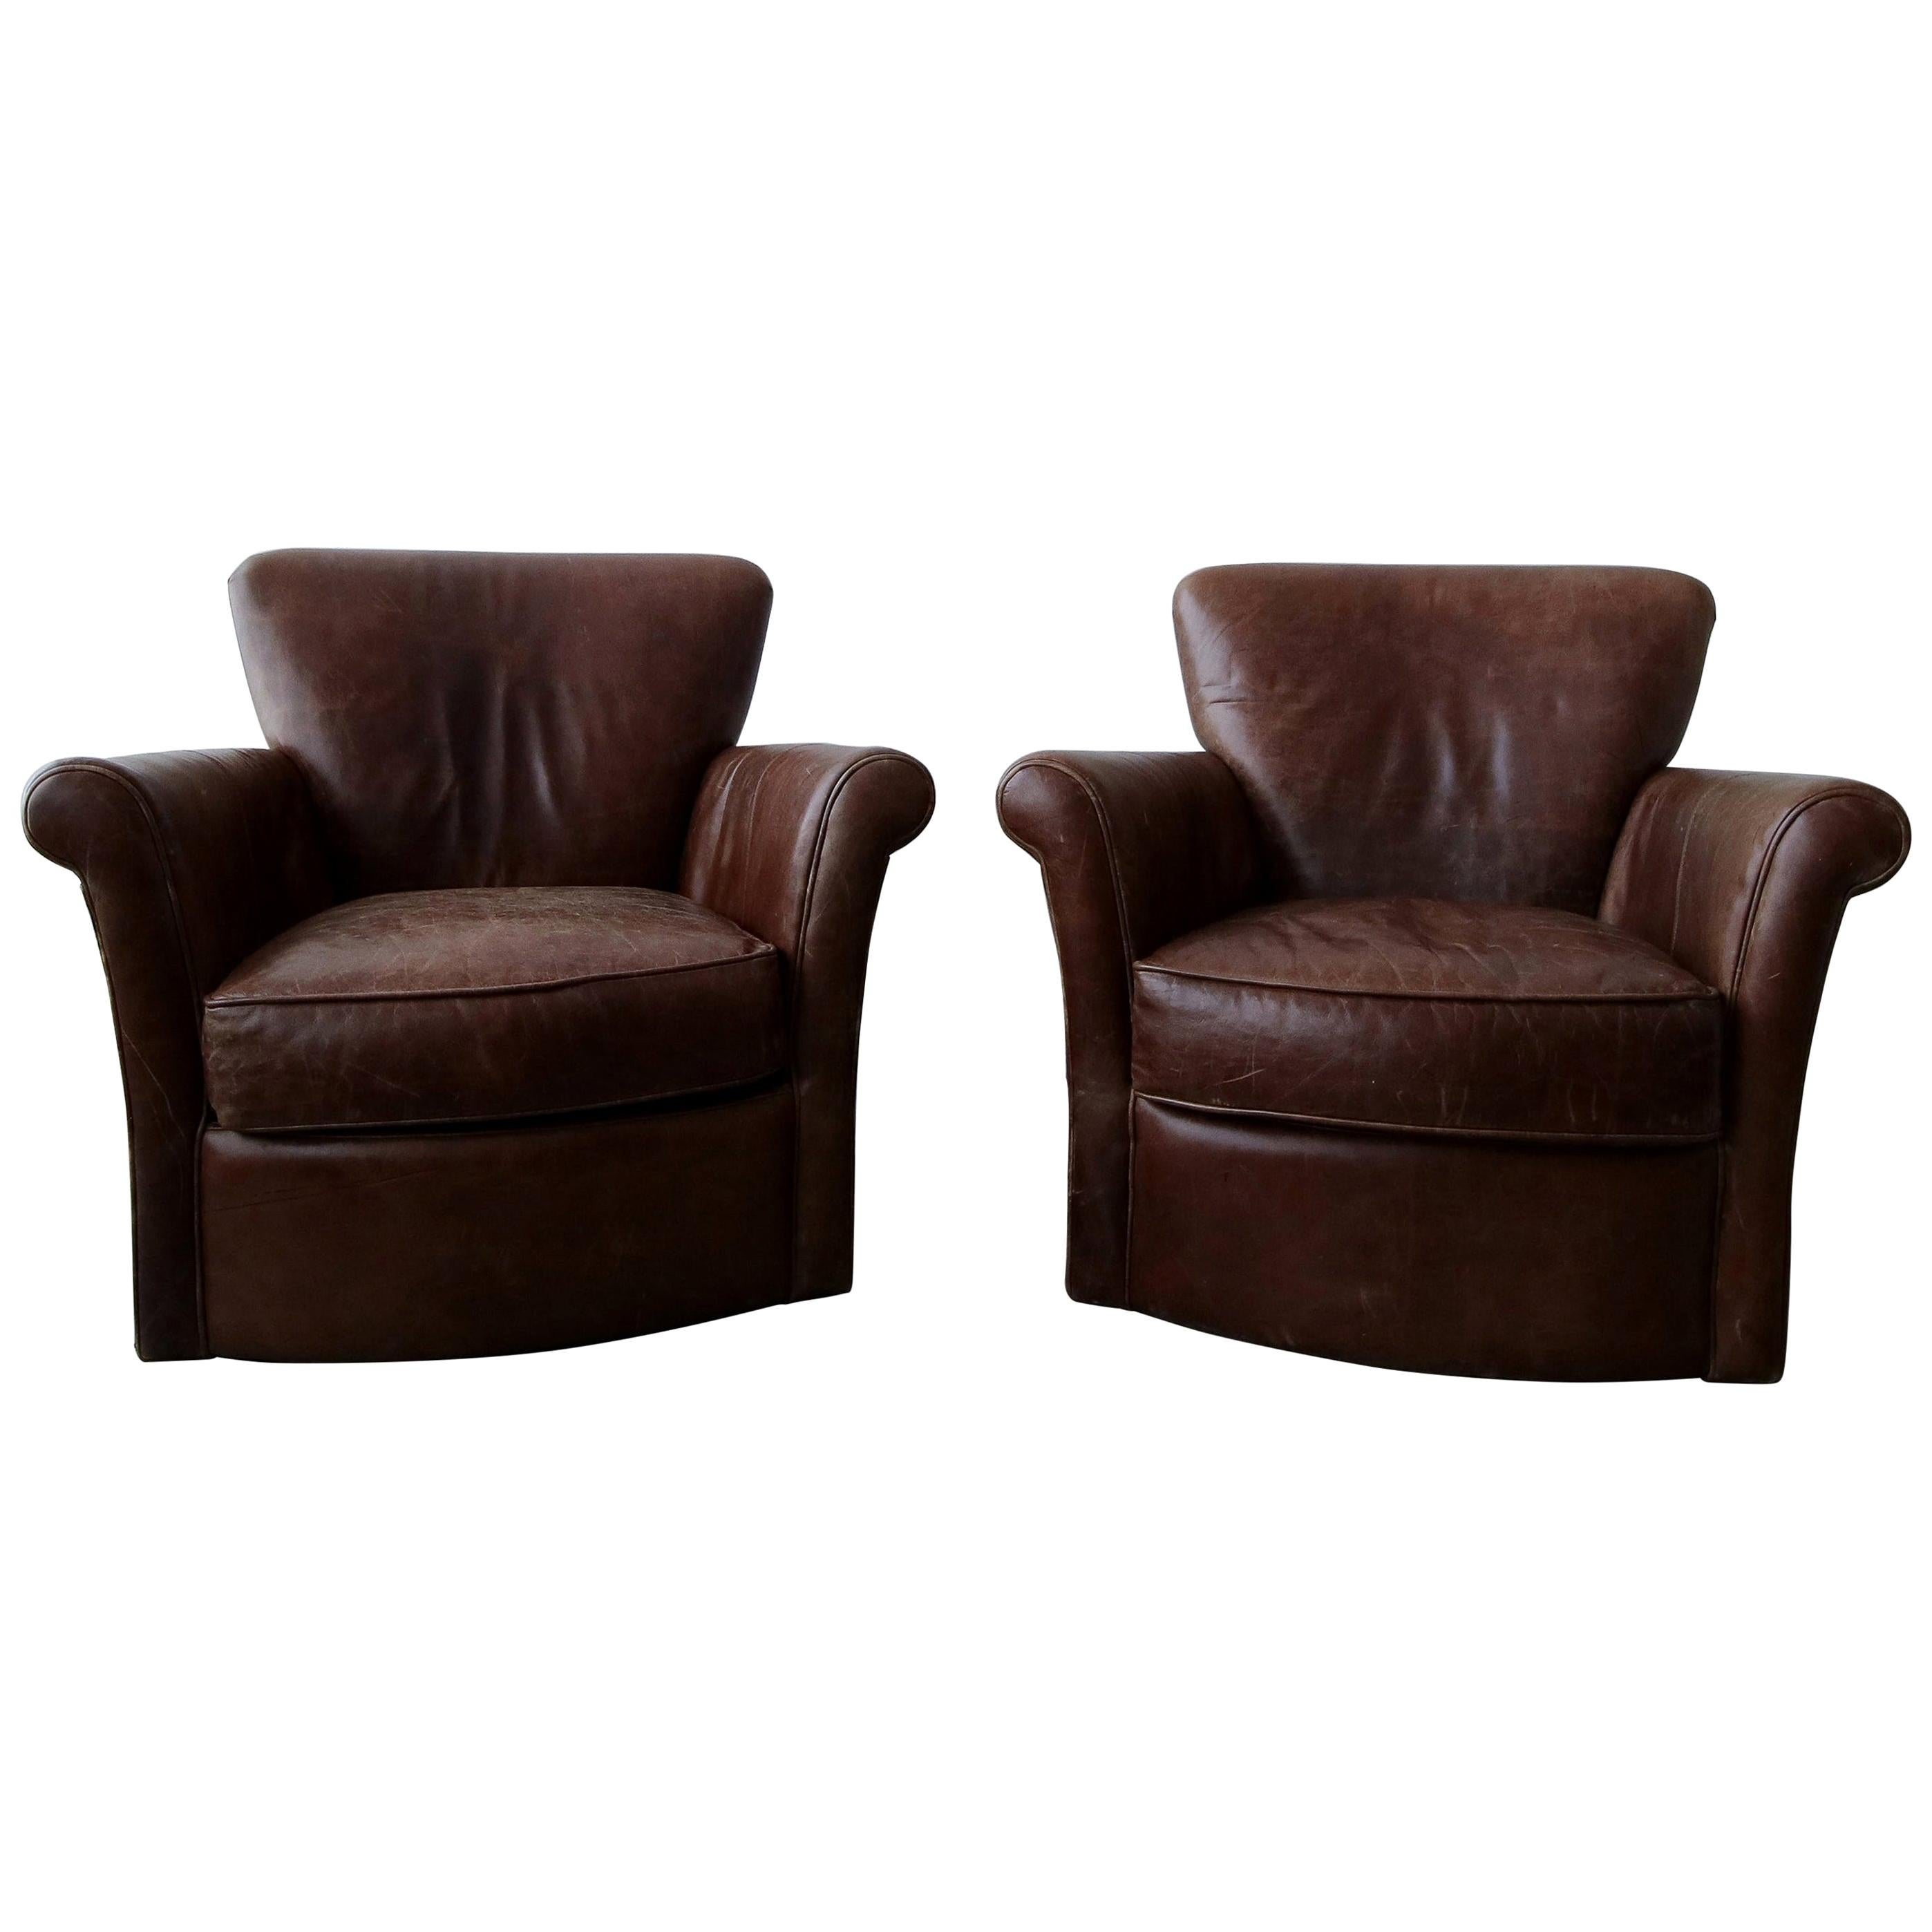 Pair of French Deco Style Patinaed Leather Club Lounge Chairs